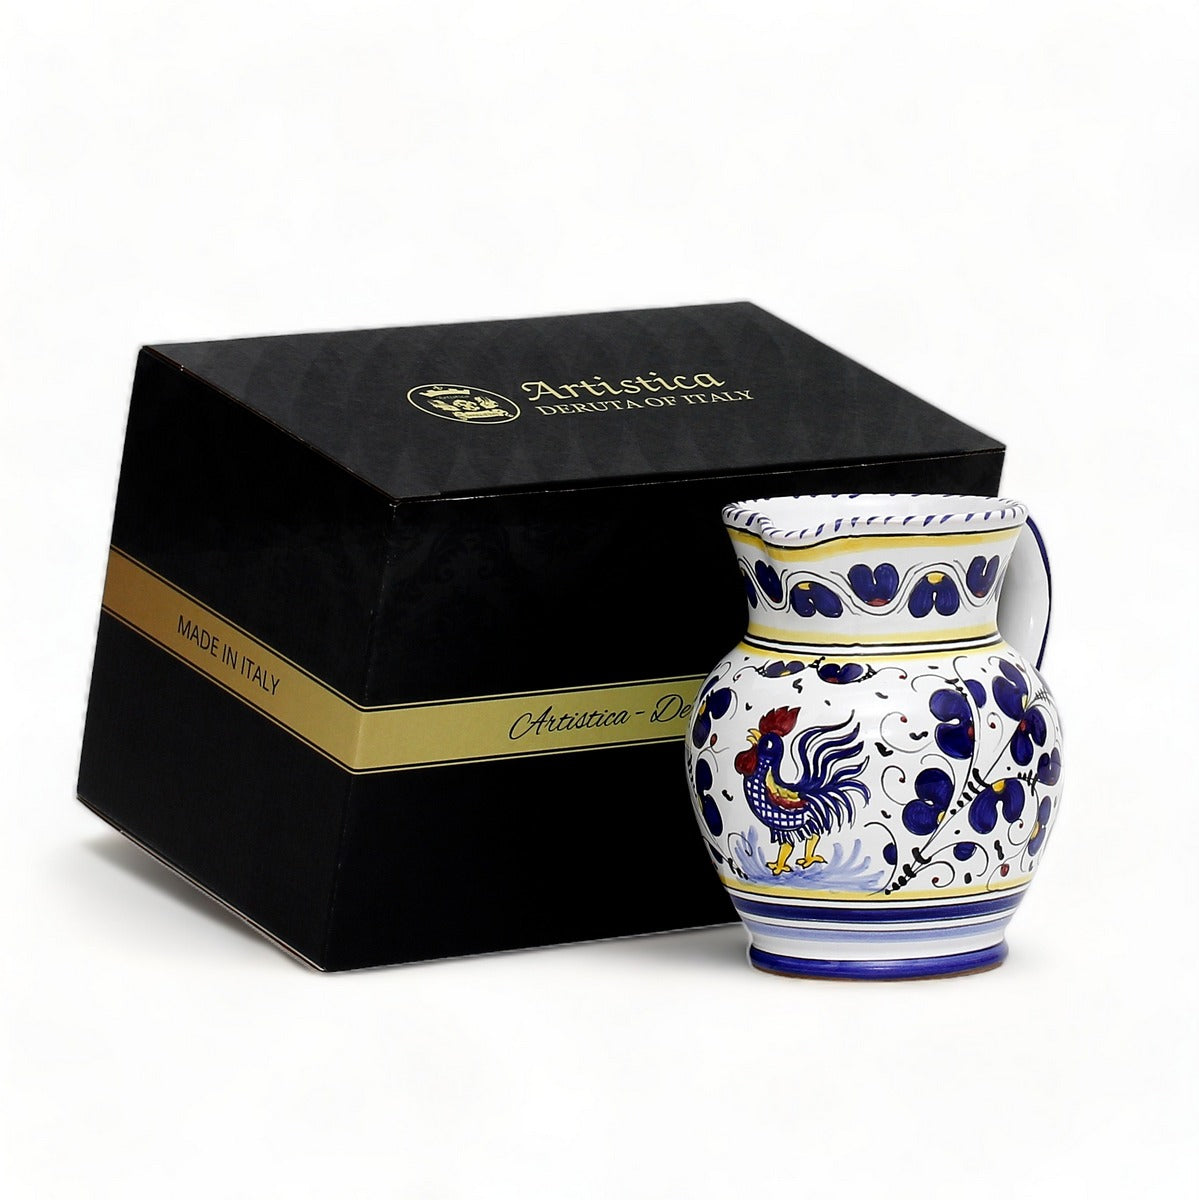 GIFT BOX: With authentic Deruta hand painted ceramic - Pitcher Blue Rooster Design